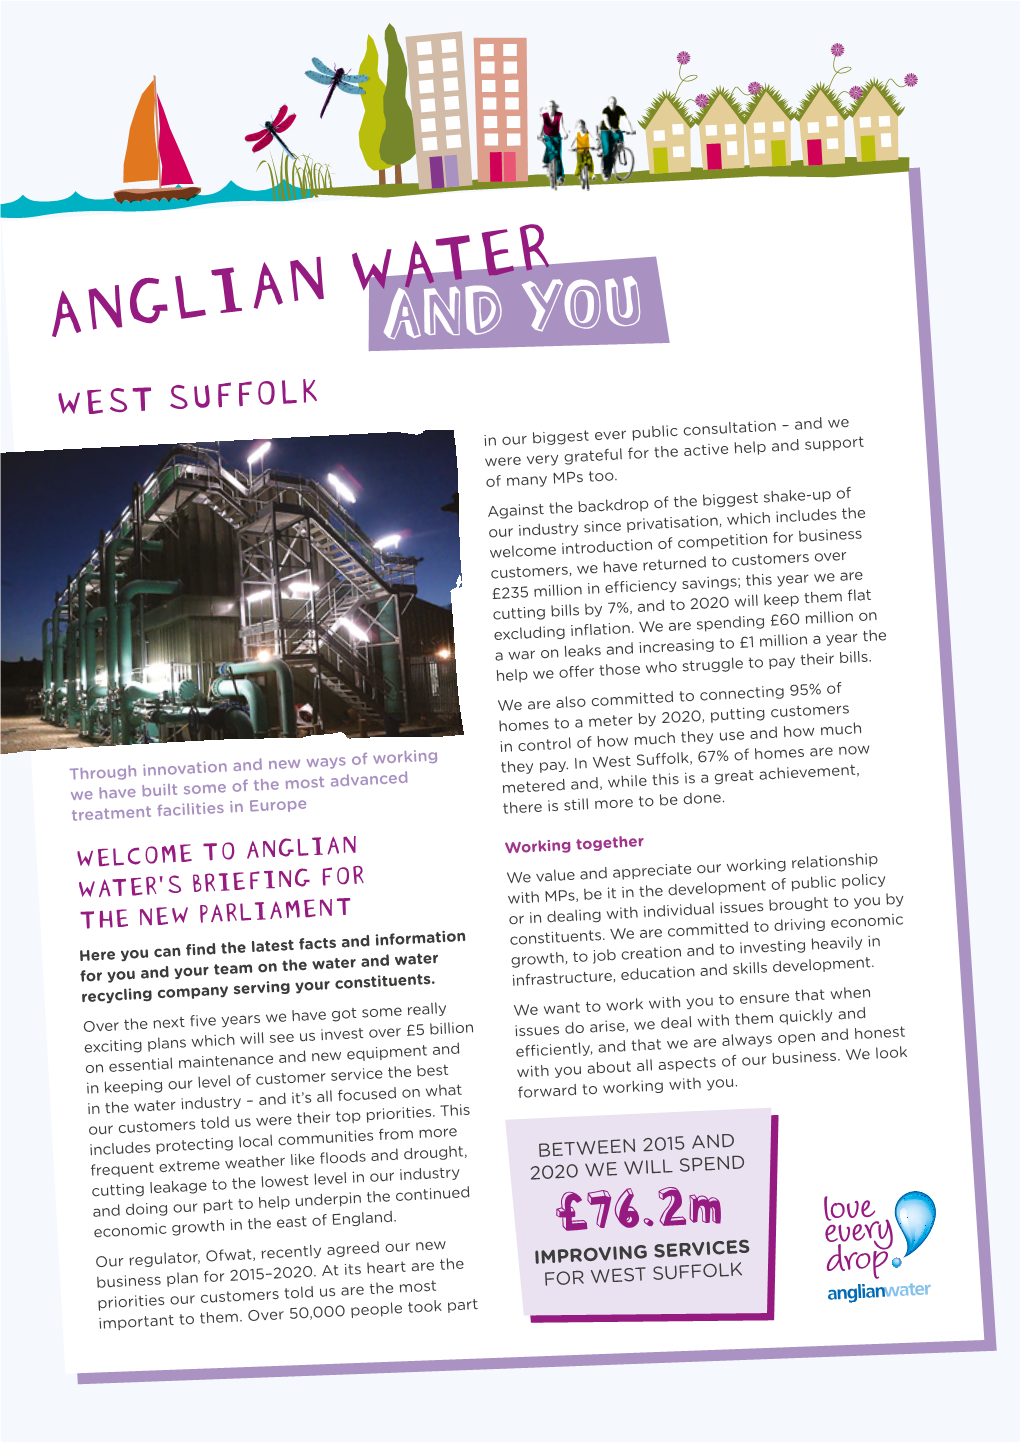 ANGLIAN WATERAND YOU WEST SUFFOLK in Our Biggest Ever Public Consultation – and We Were Very Grateful for the Active Help and Support of Many Mps Too